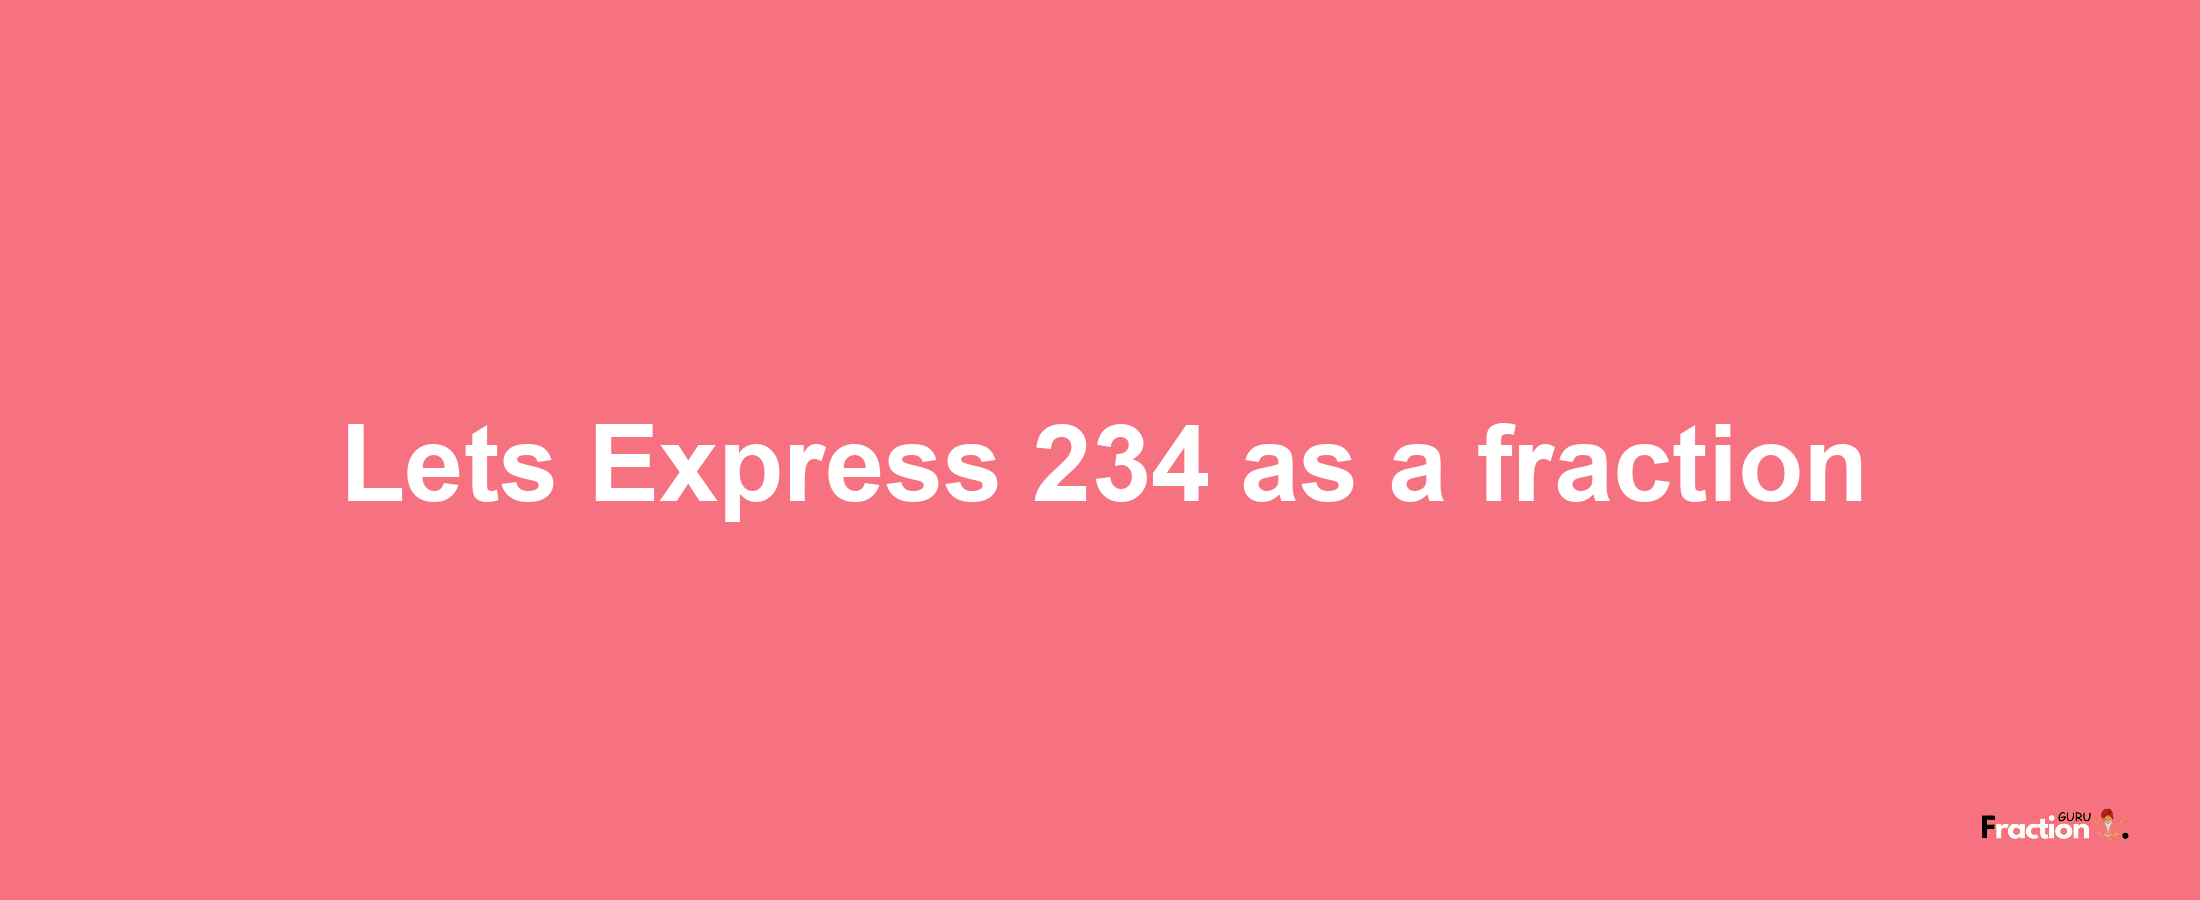 Lets Express 234 as afraction